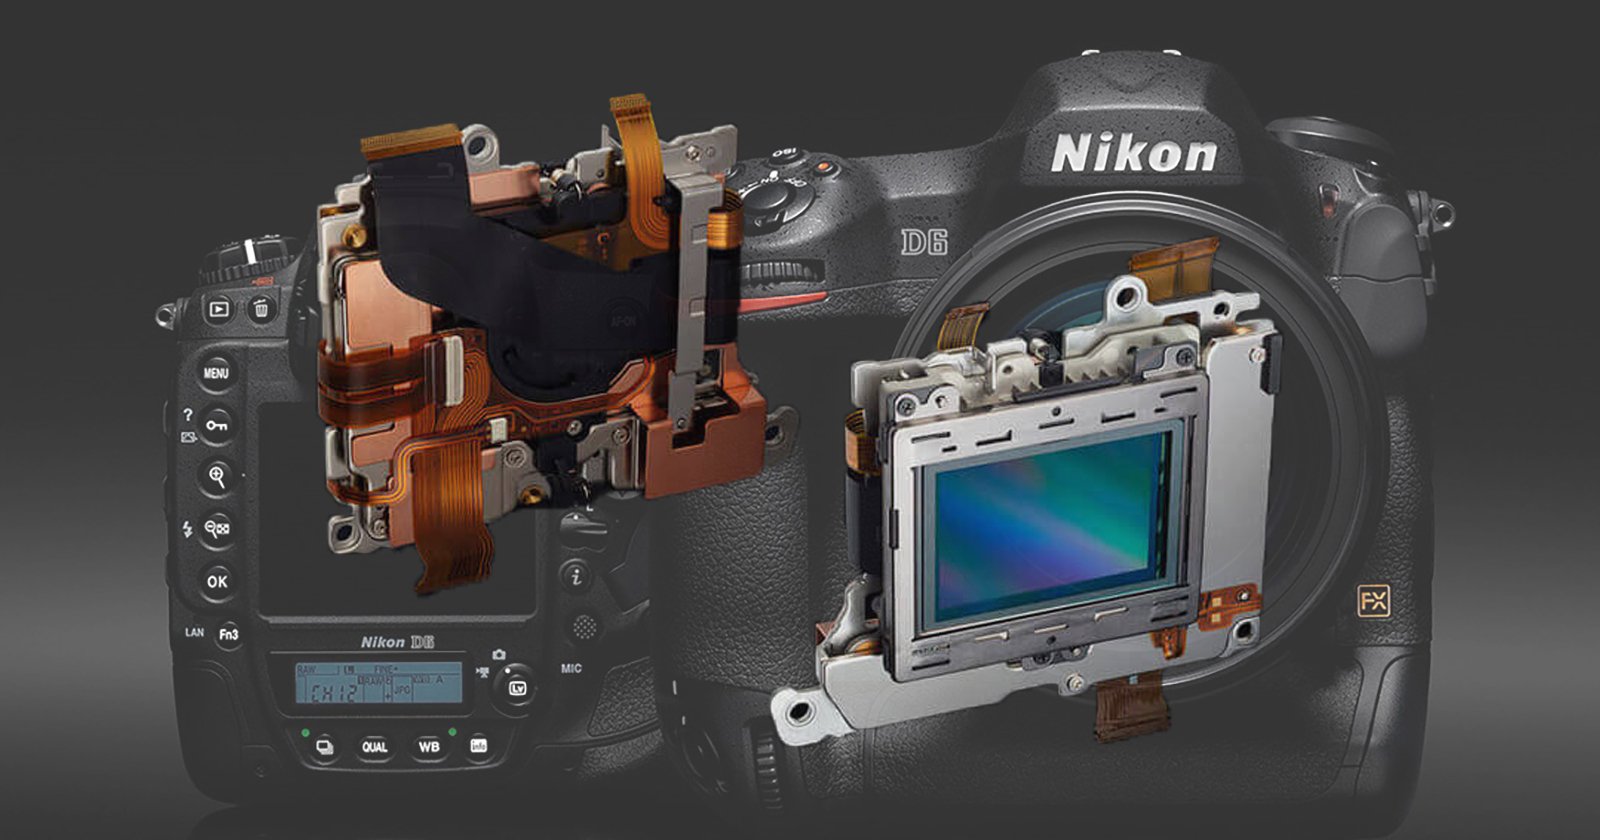 The Nikon D6 Will Feature In-Body Image Stabilization: Report